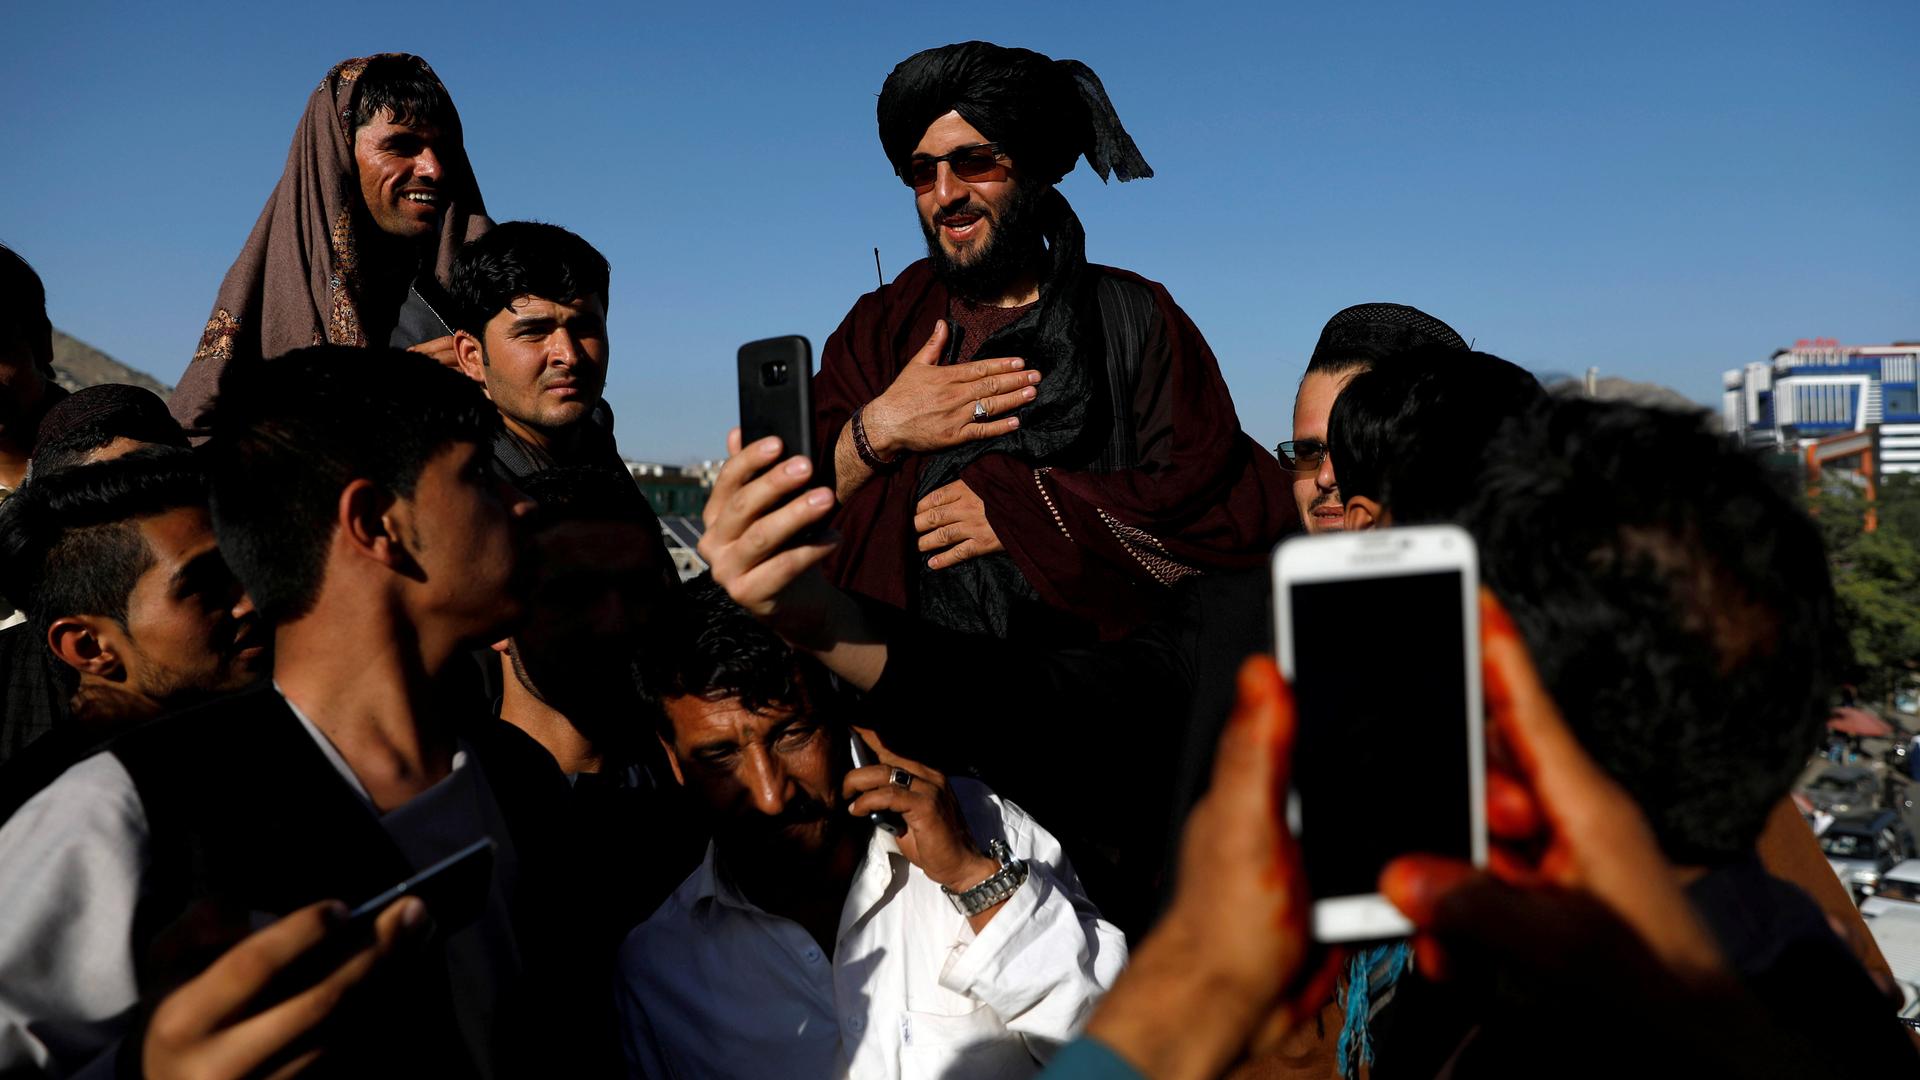 a taliban being carried on people's shoulders while others take photos